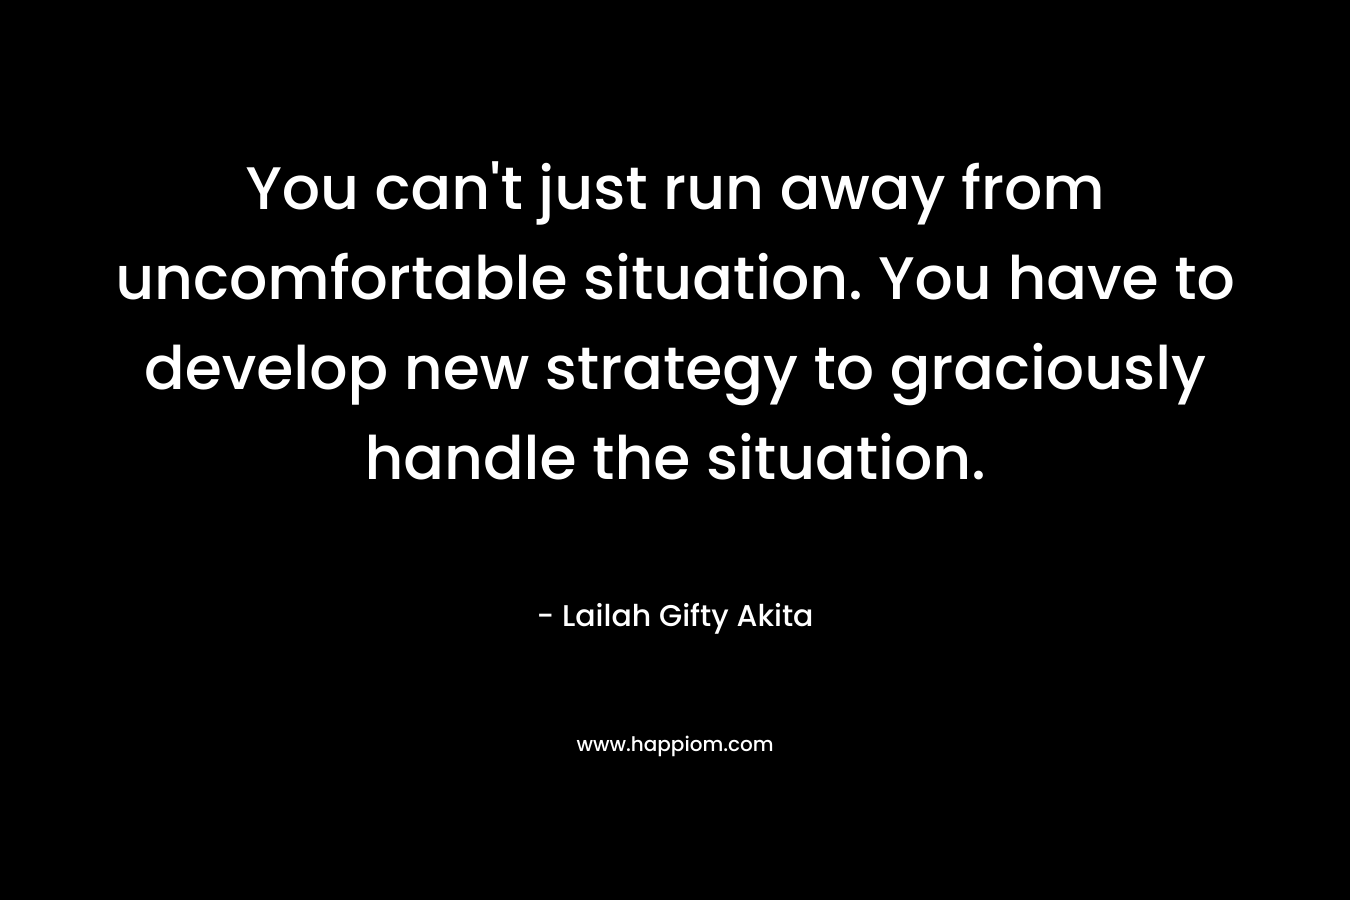 You can’t just run away from uncomfortable situation. You have to develop new strategy to graciously handle the situation. – Lailah Gifty Akita